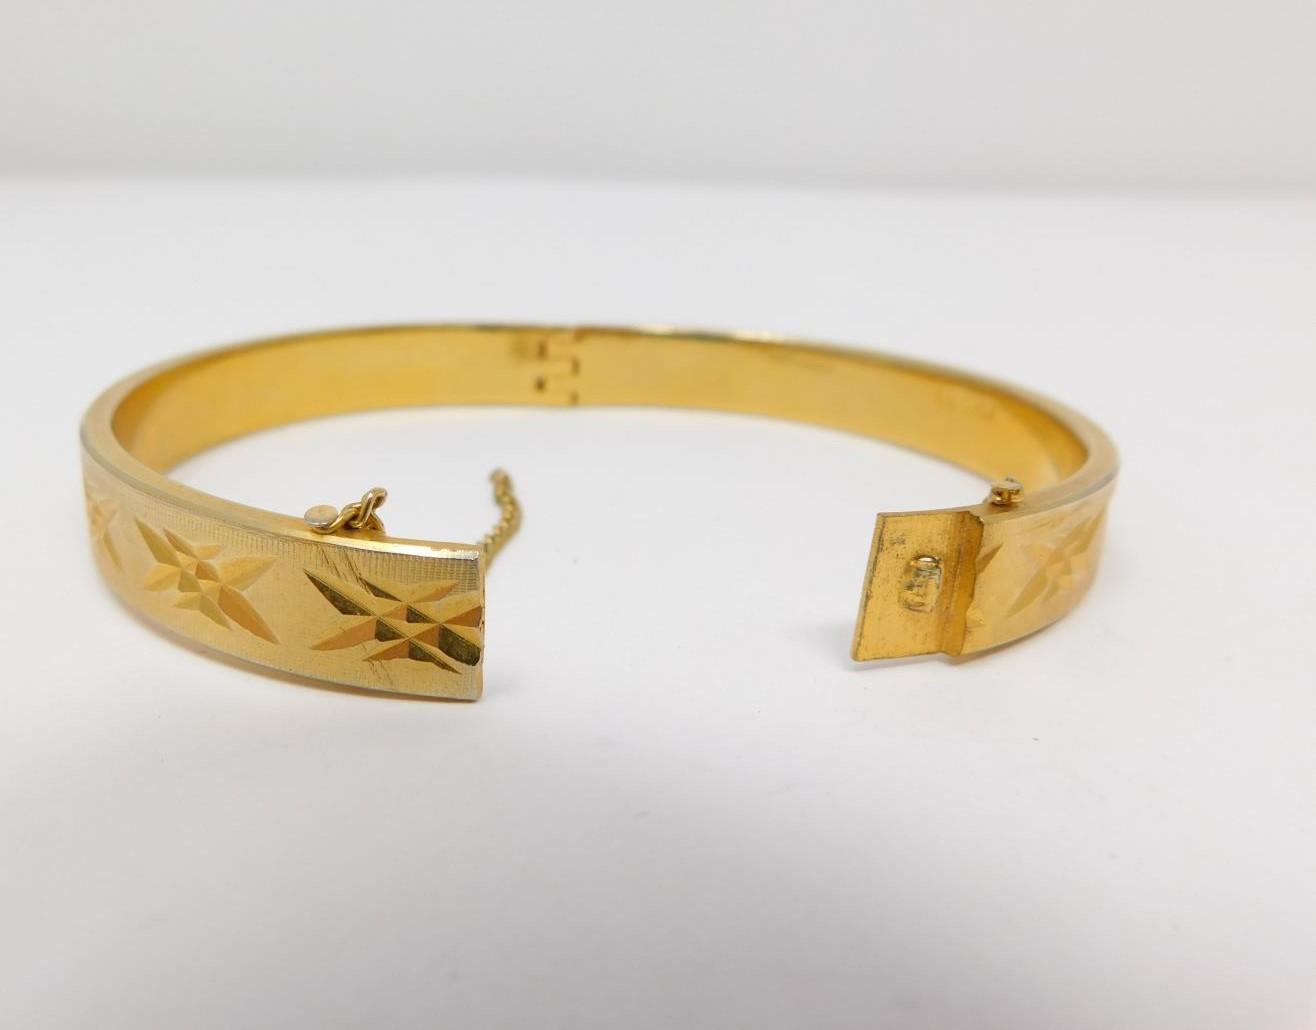 A collection of vintage jewellery inlcuding an 18 carat rolled gold bangle with star cur design, a - Image 19 of 28